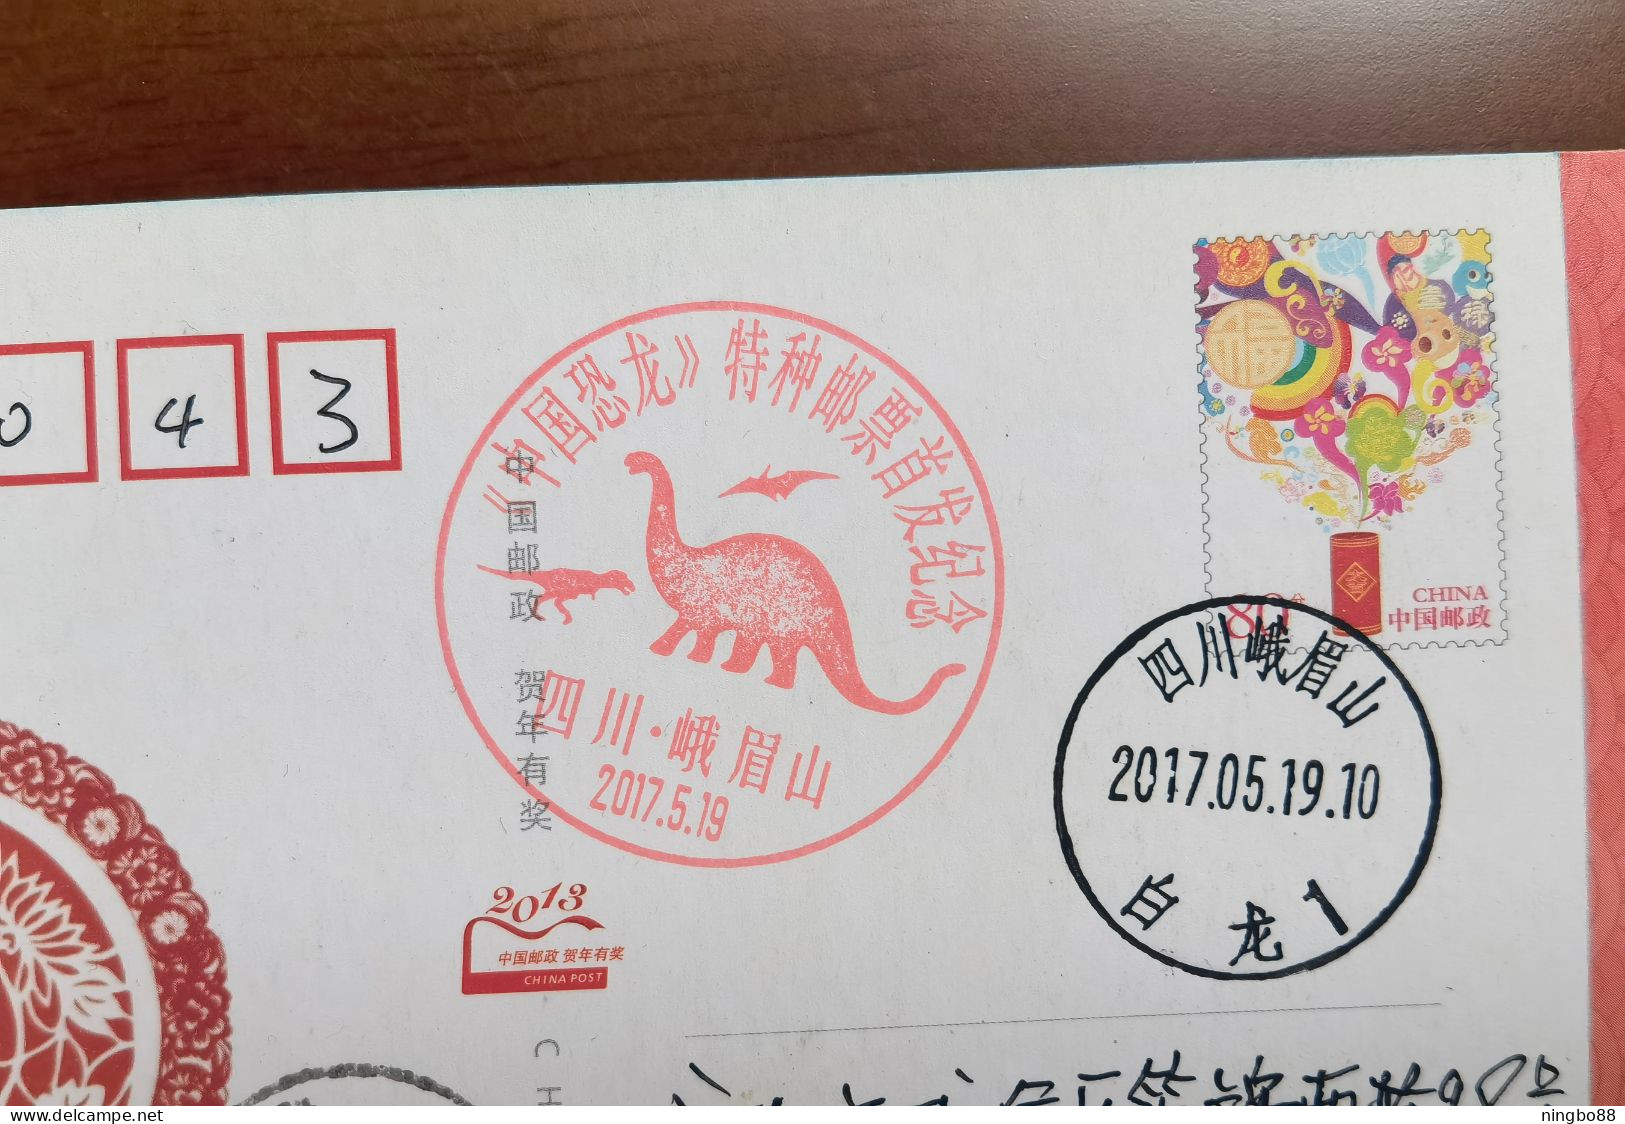 Shunosaurus Dinosaur & Pterosauria,CN 17 E'meishan Post China Dinosaur Stamps Issue Commemorative PMK 1st Day Used On - Fossilien